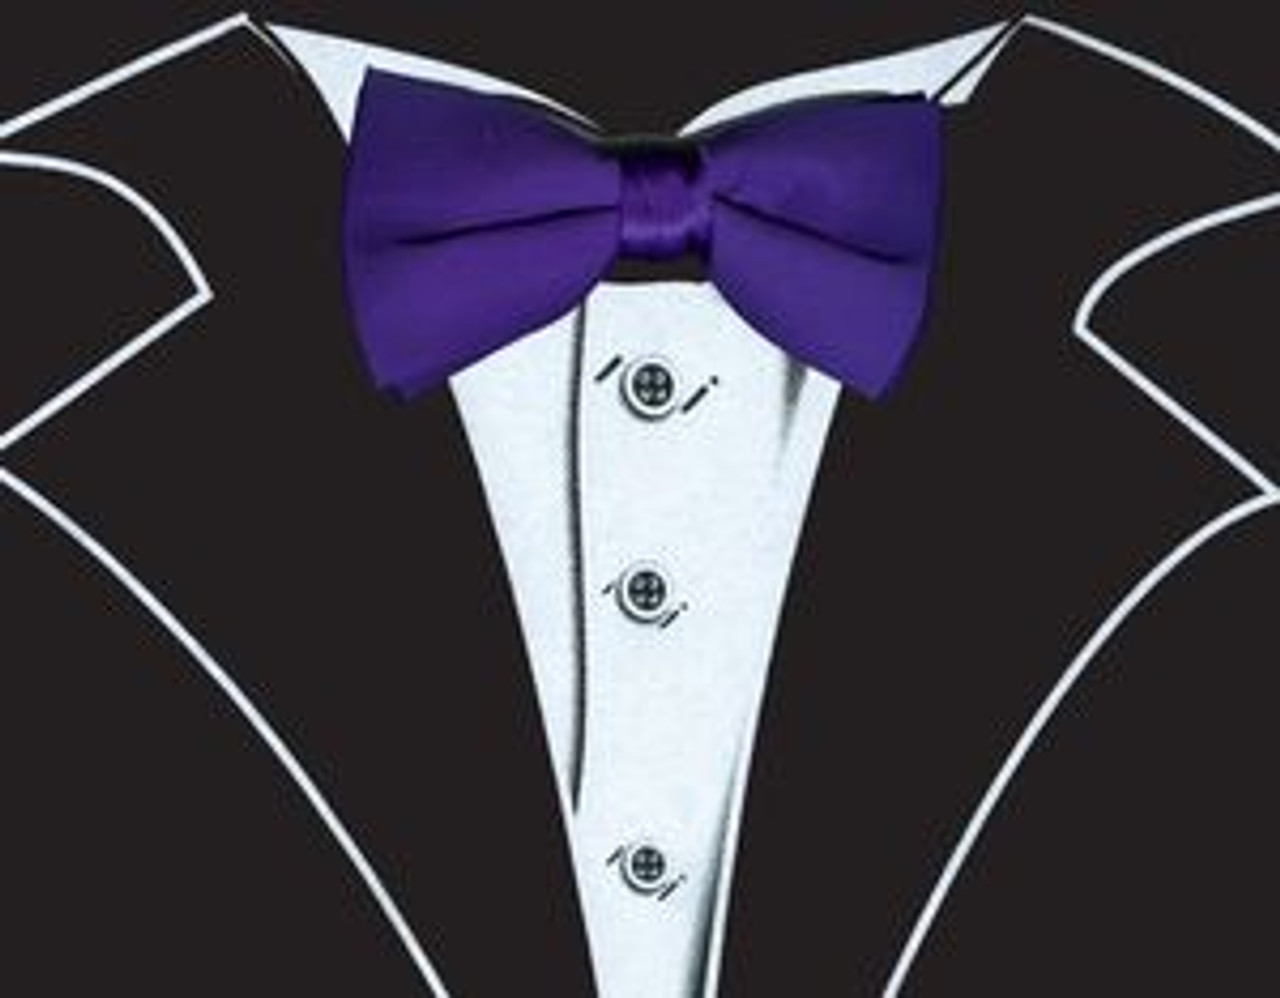 Tuxedo T Shirt In Black With Real Purple Bow Tie Shop Men S Tuxedo Tees - white suit roblox t shirt